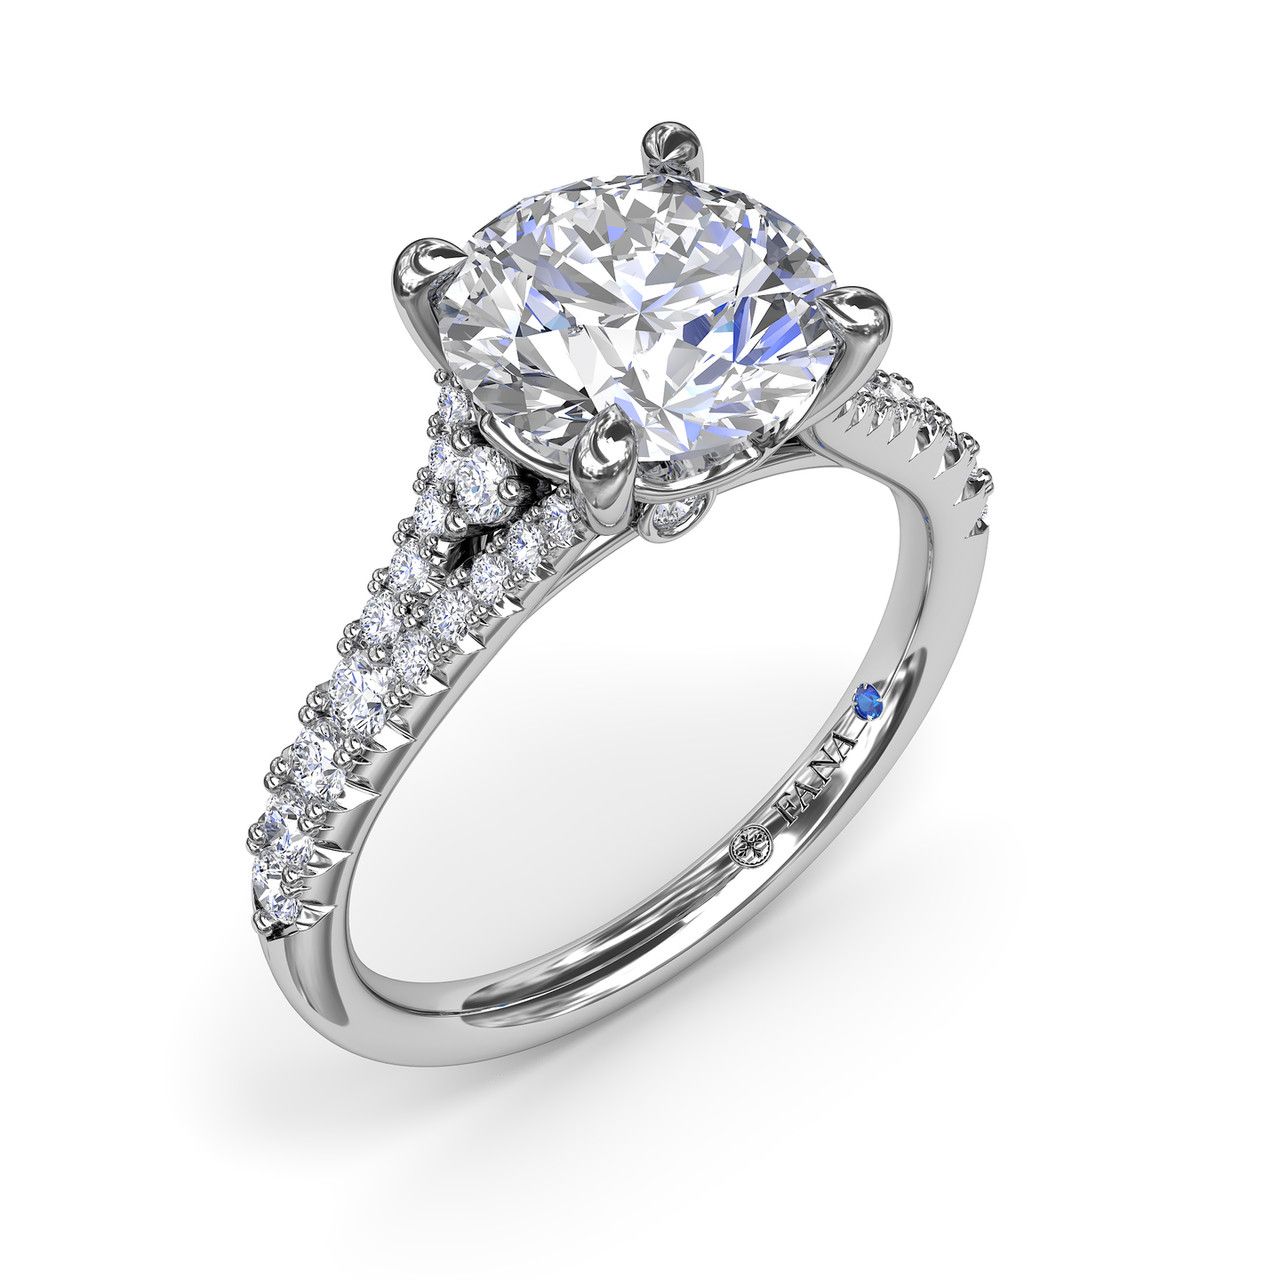 14K WHITE GOLD SPLIT SHANK SEMI-MOUNT RING SIZE 6.5 WITH 32=0.43TW ROUND G-H VS2-SI1 DIAMONDS AND ONE ROUND BLUE SAPPHIRE  (3.73 GRAMS)